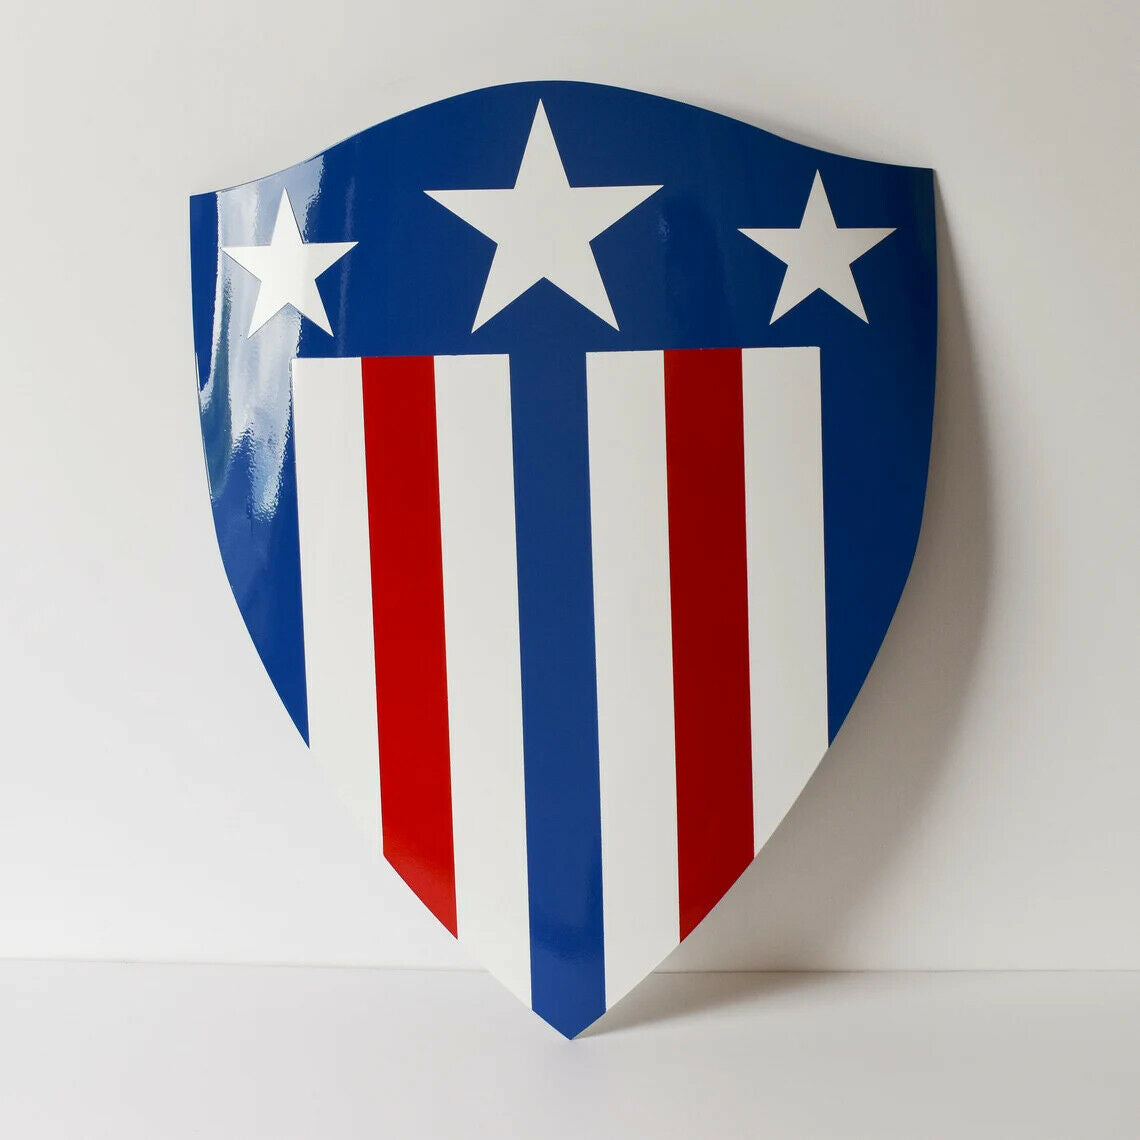 Captain America Heater Shield 24'' Comic Style First Appearance Shield - Metal